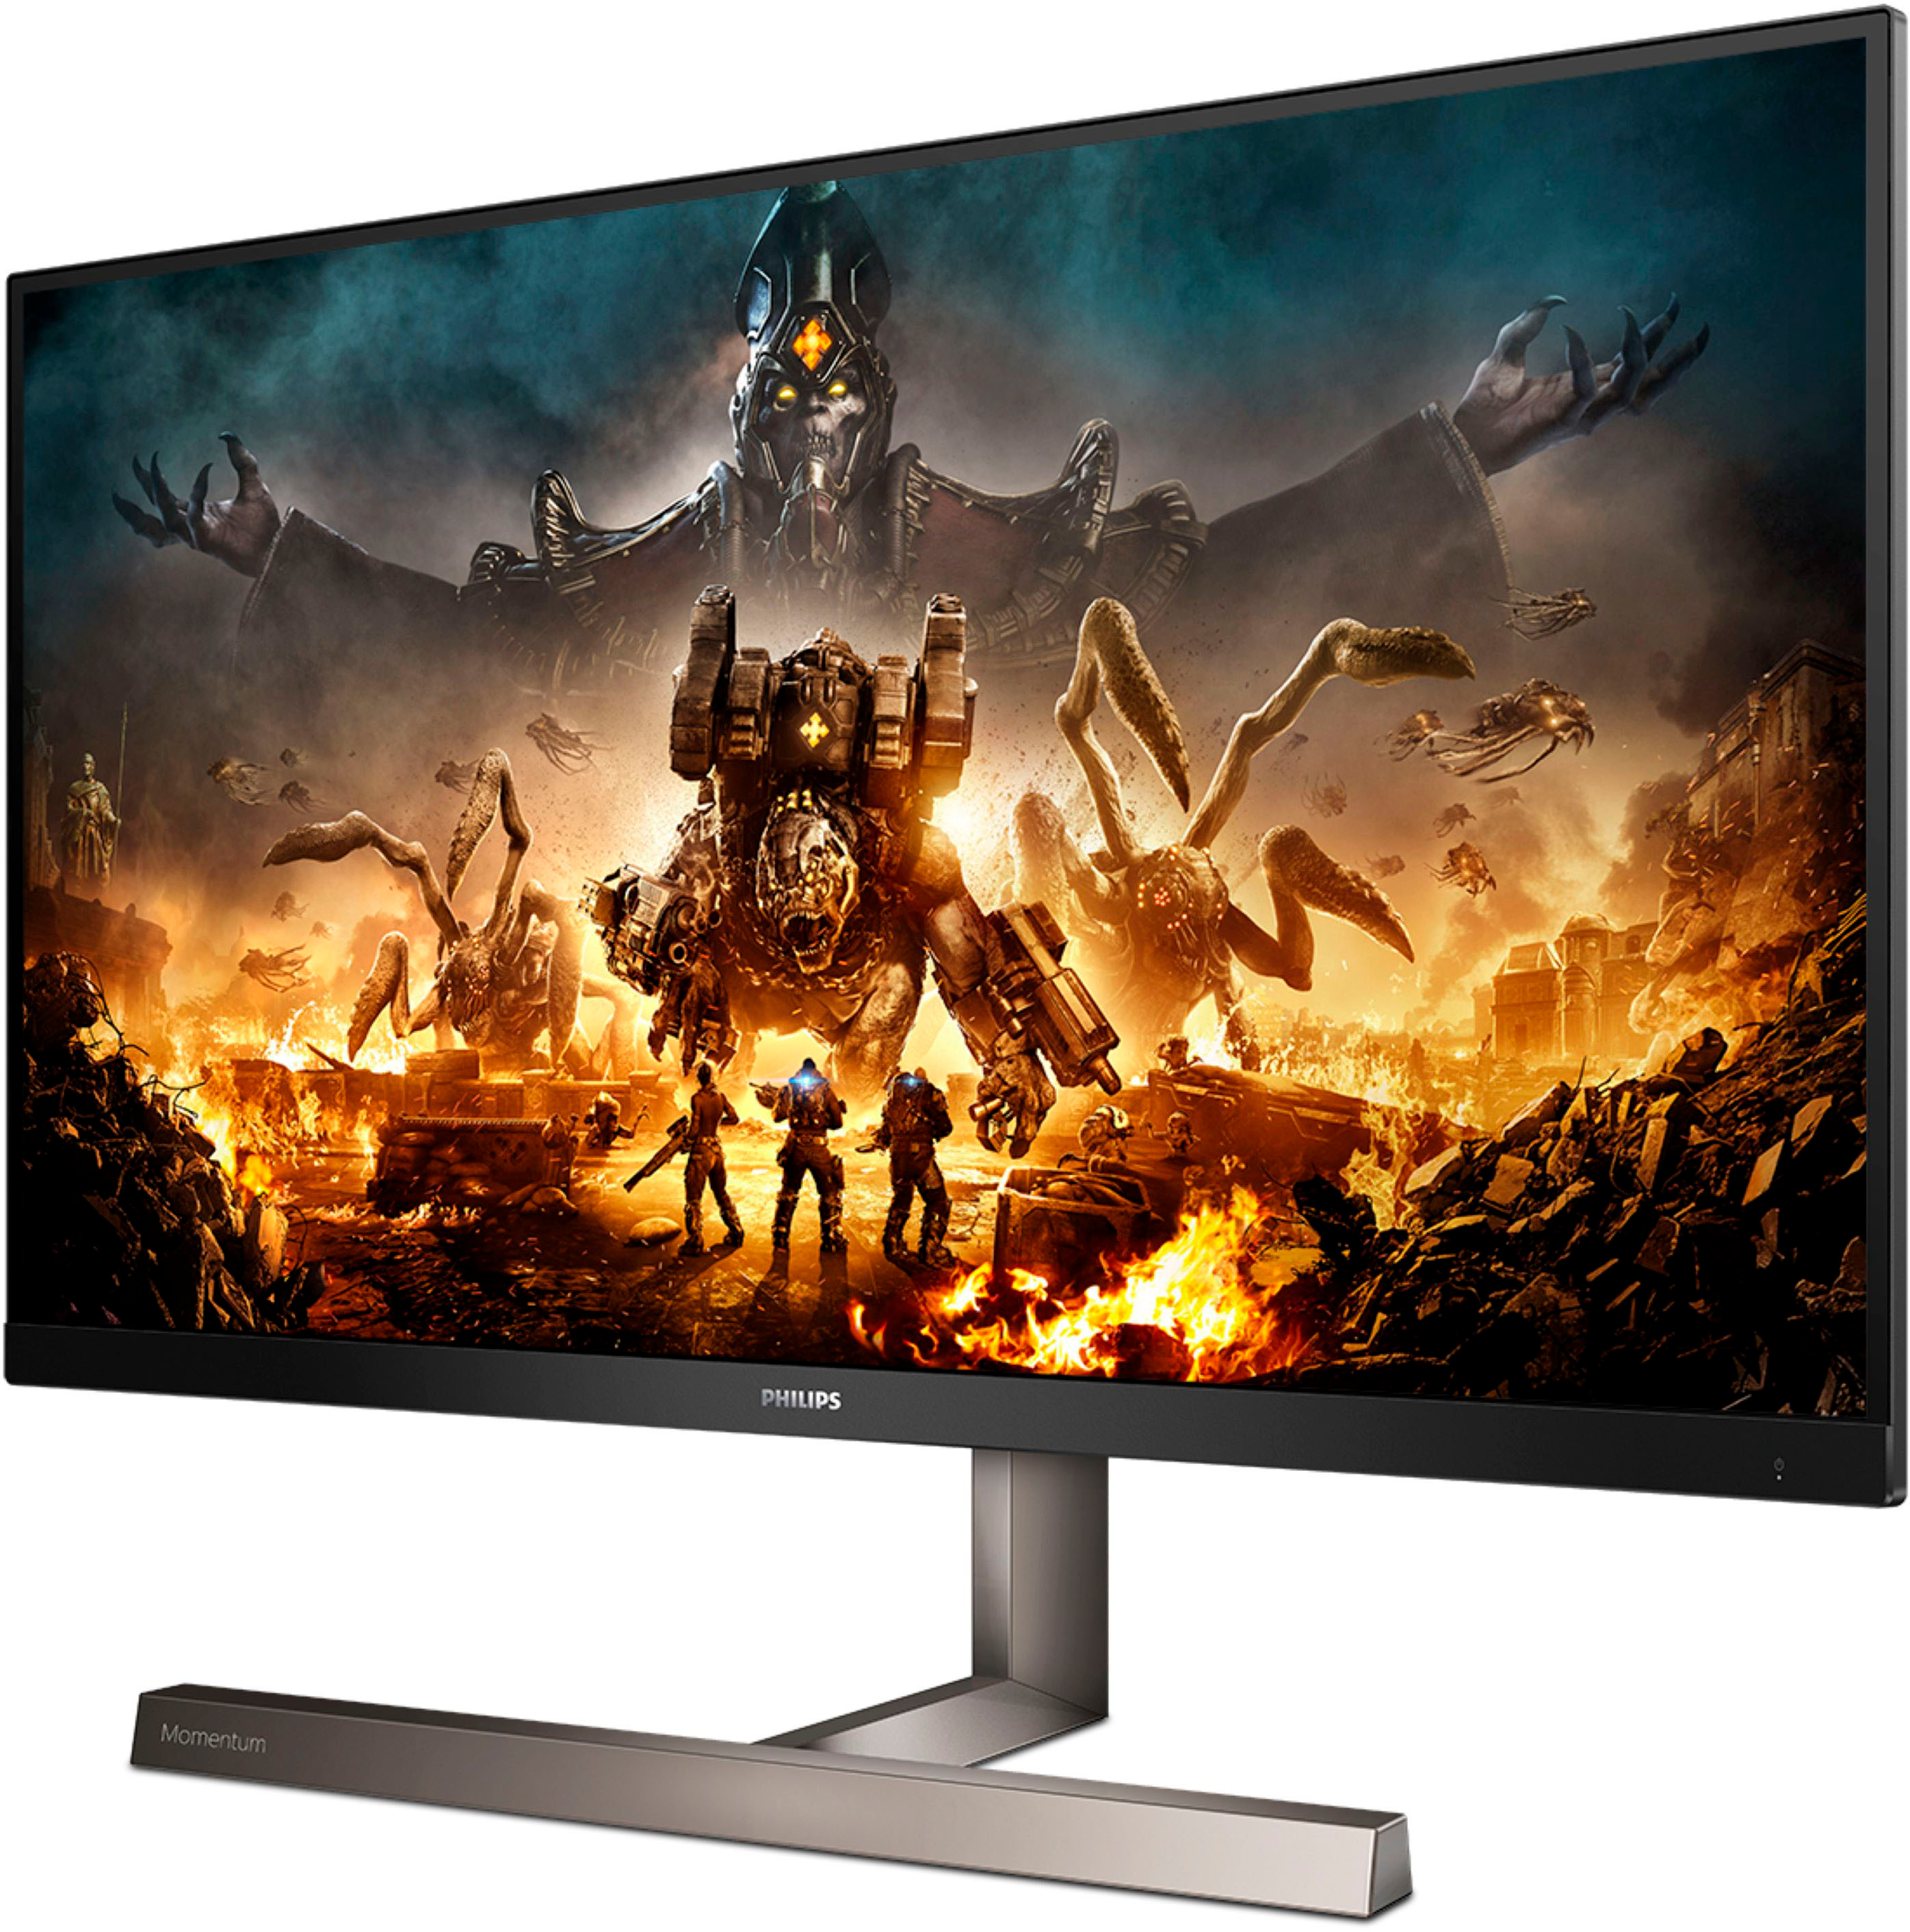 Philips LED 4K Gaming Monitor with HDR - Best Buy